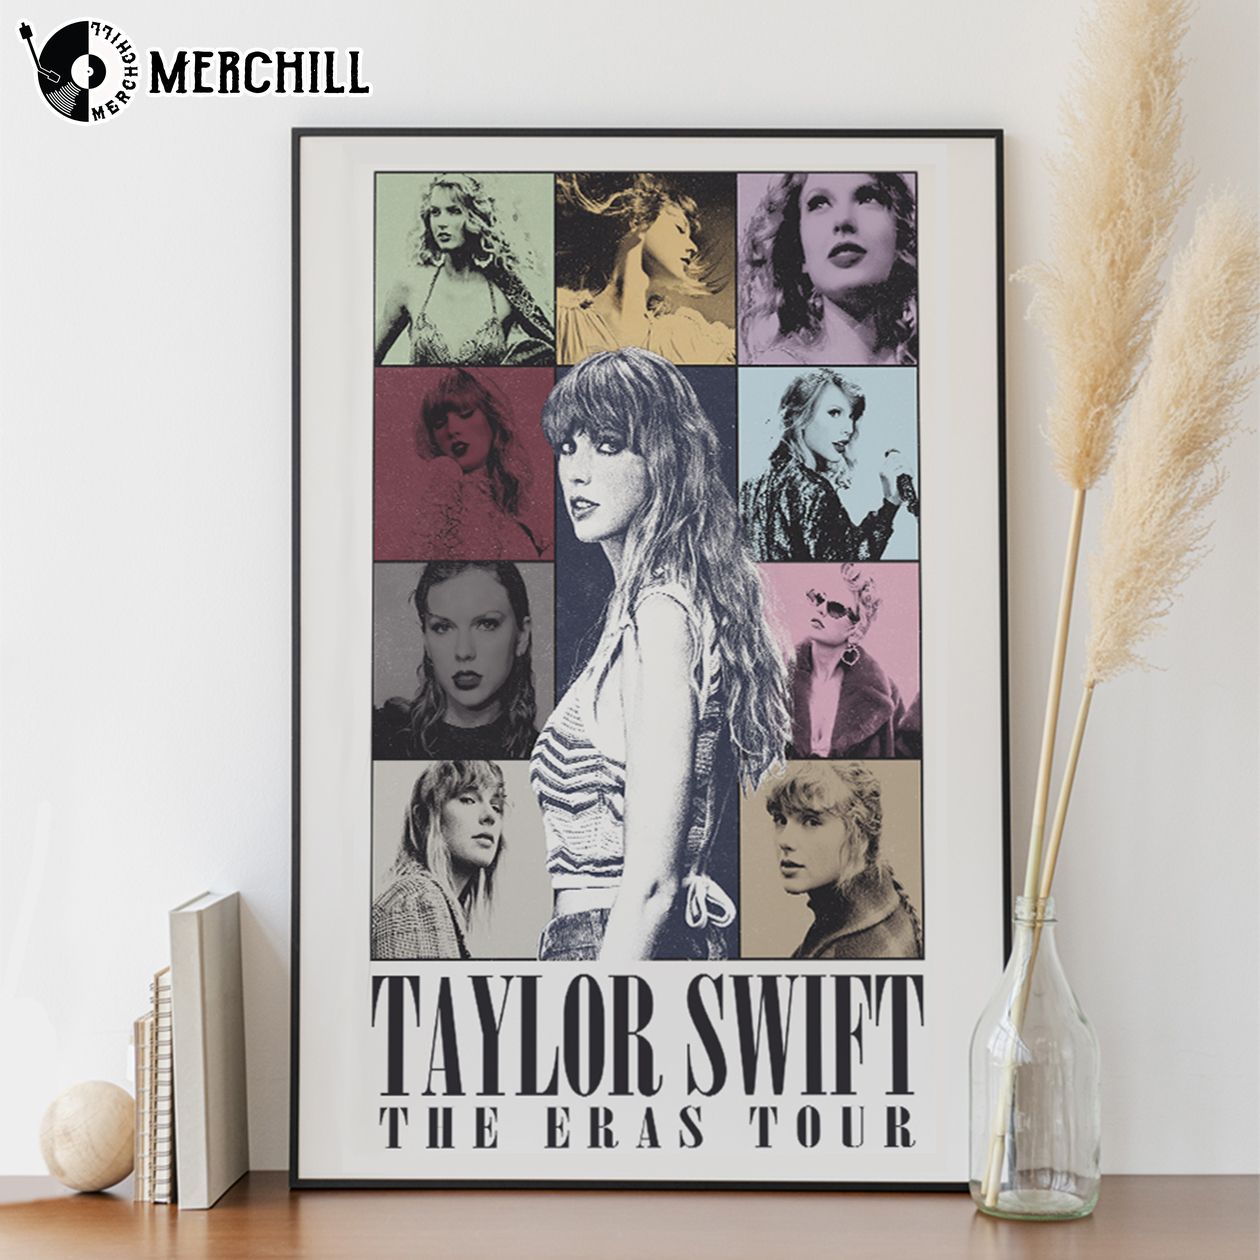 Taylor Swift Merch: Taylor Music Swift Album Poster The Cover, taylor swift  poster 